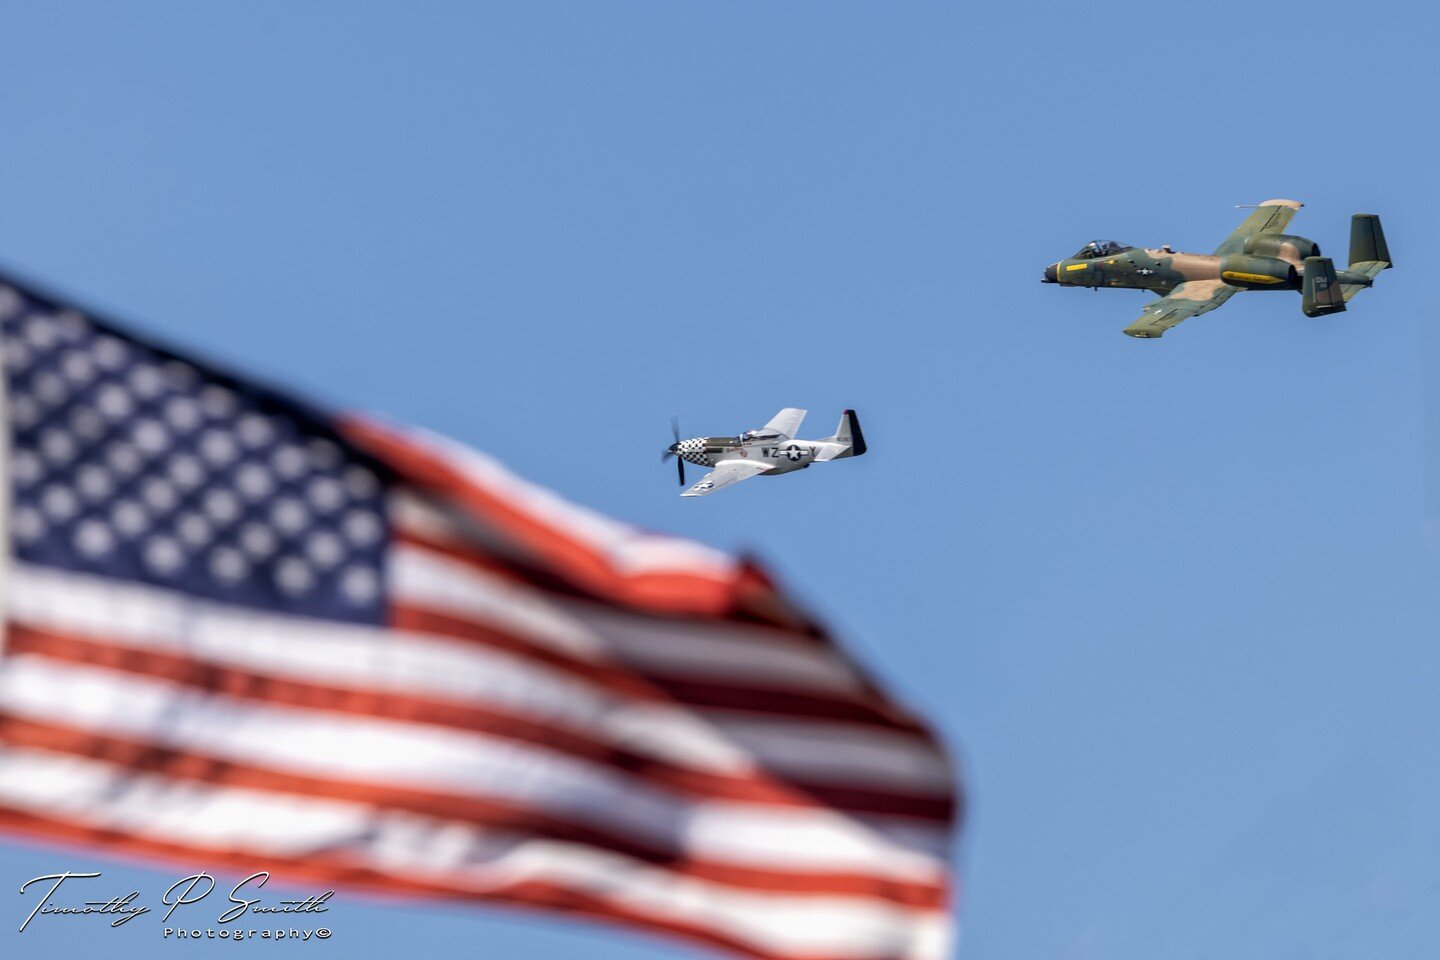 ⠀⠀⠀⠀⠀⠀⠀⠀
US Air Force Heritage Flight

Capt. Lindsay &ldquo;MAD&rdquo; Johnson from the A-10 Demo Team&nbsp;and Charles&nbsp;&ldquo;Tuna&rdquo; Hainline TF-51D Mustang &lsquo;Bum Steer&rdquo; with the Heritage flight for the Stars and Stripes!

Oct 2